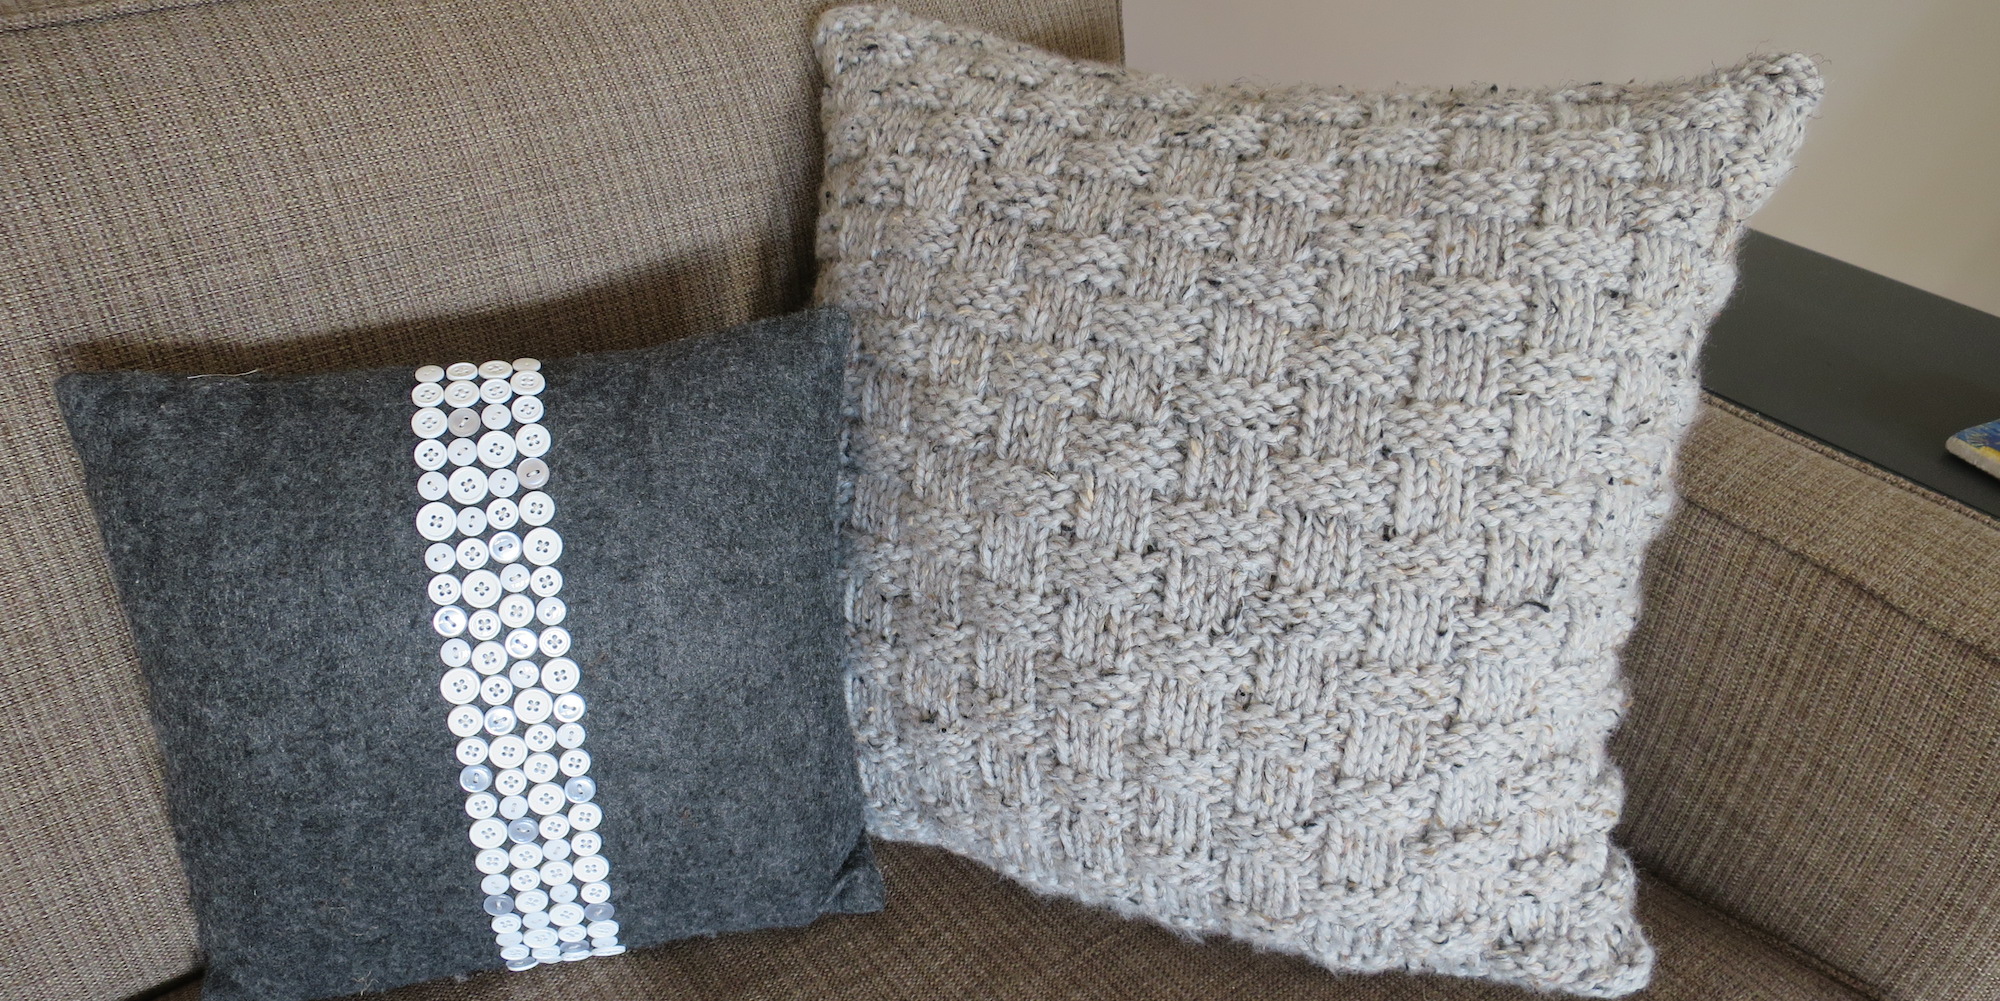 Roundup: 6 Great Uses of Long Throw Pillows - Curbly